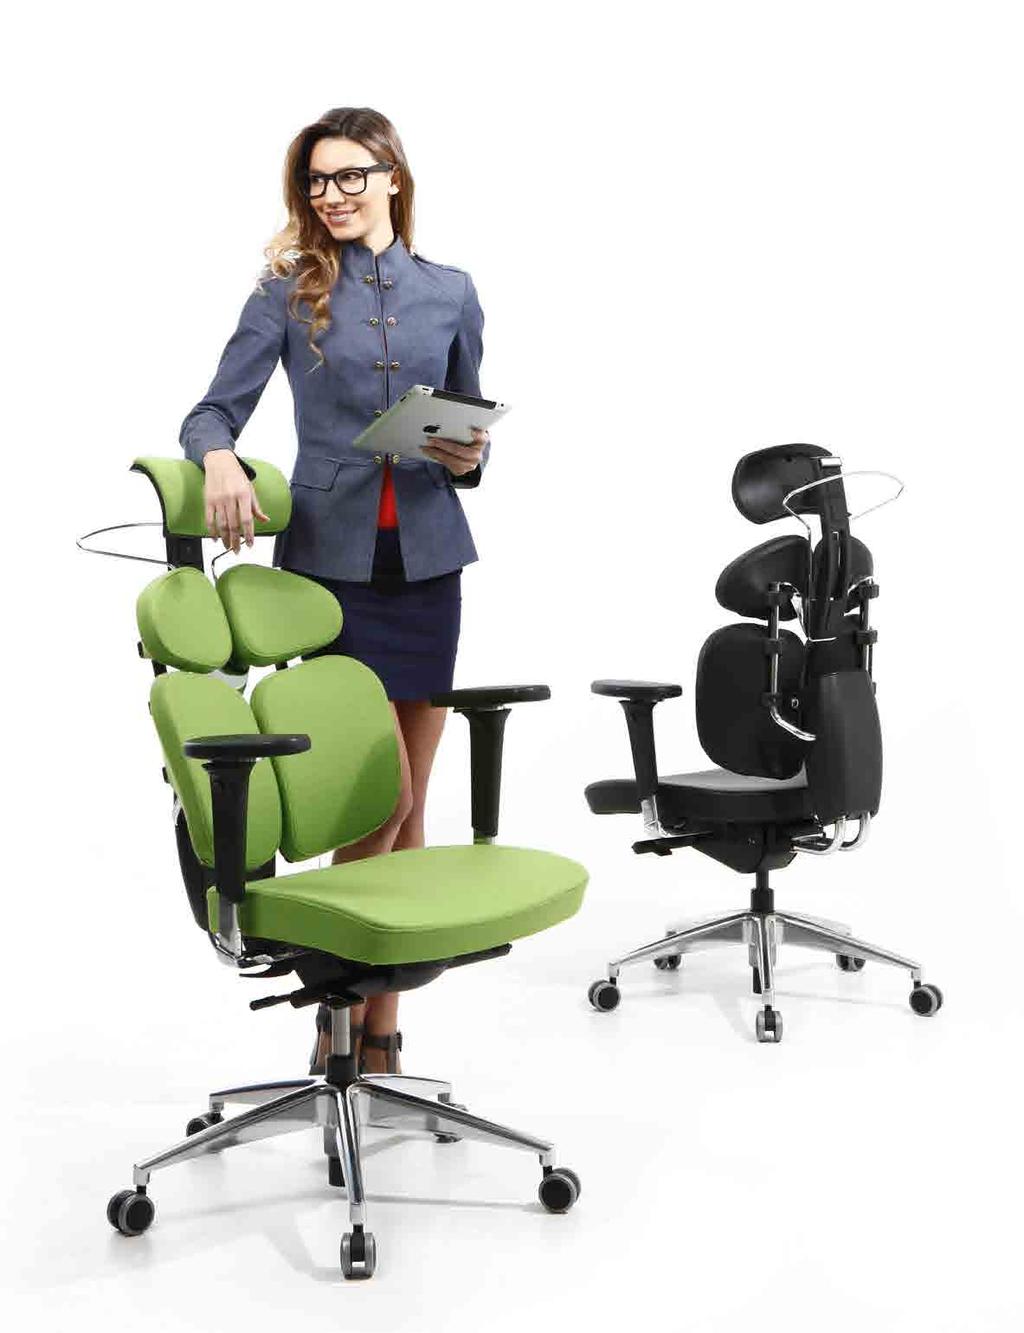 Banzai has amazing ergonomics to expand your working environment and to make you mentally alert by creating a unique area of movement during your activities.